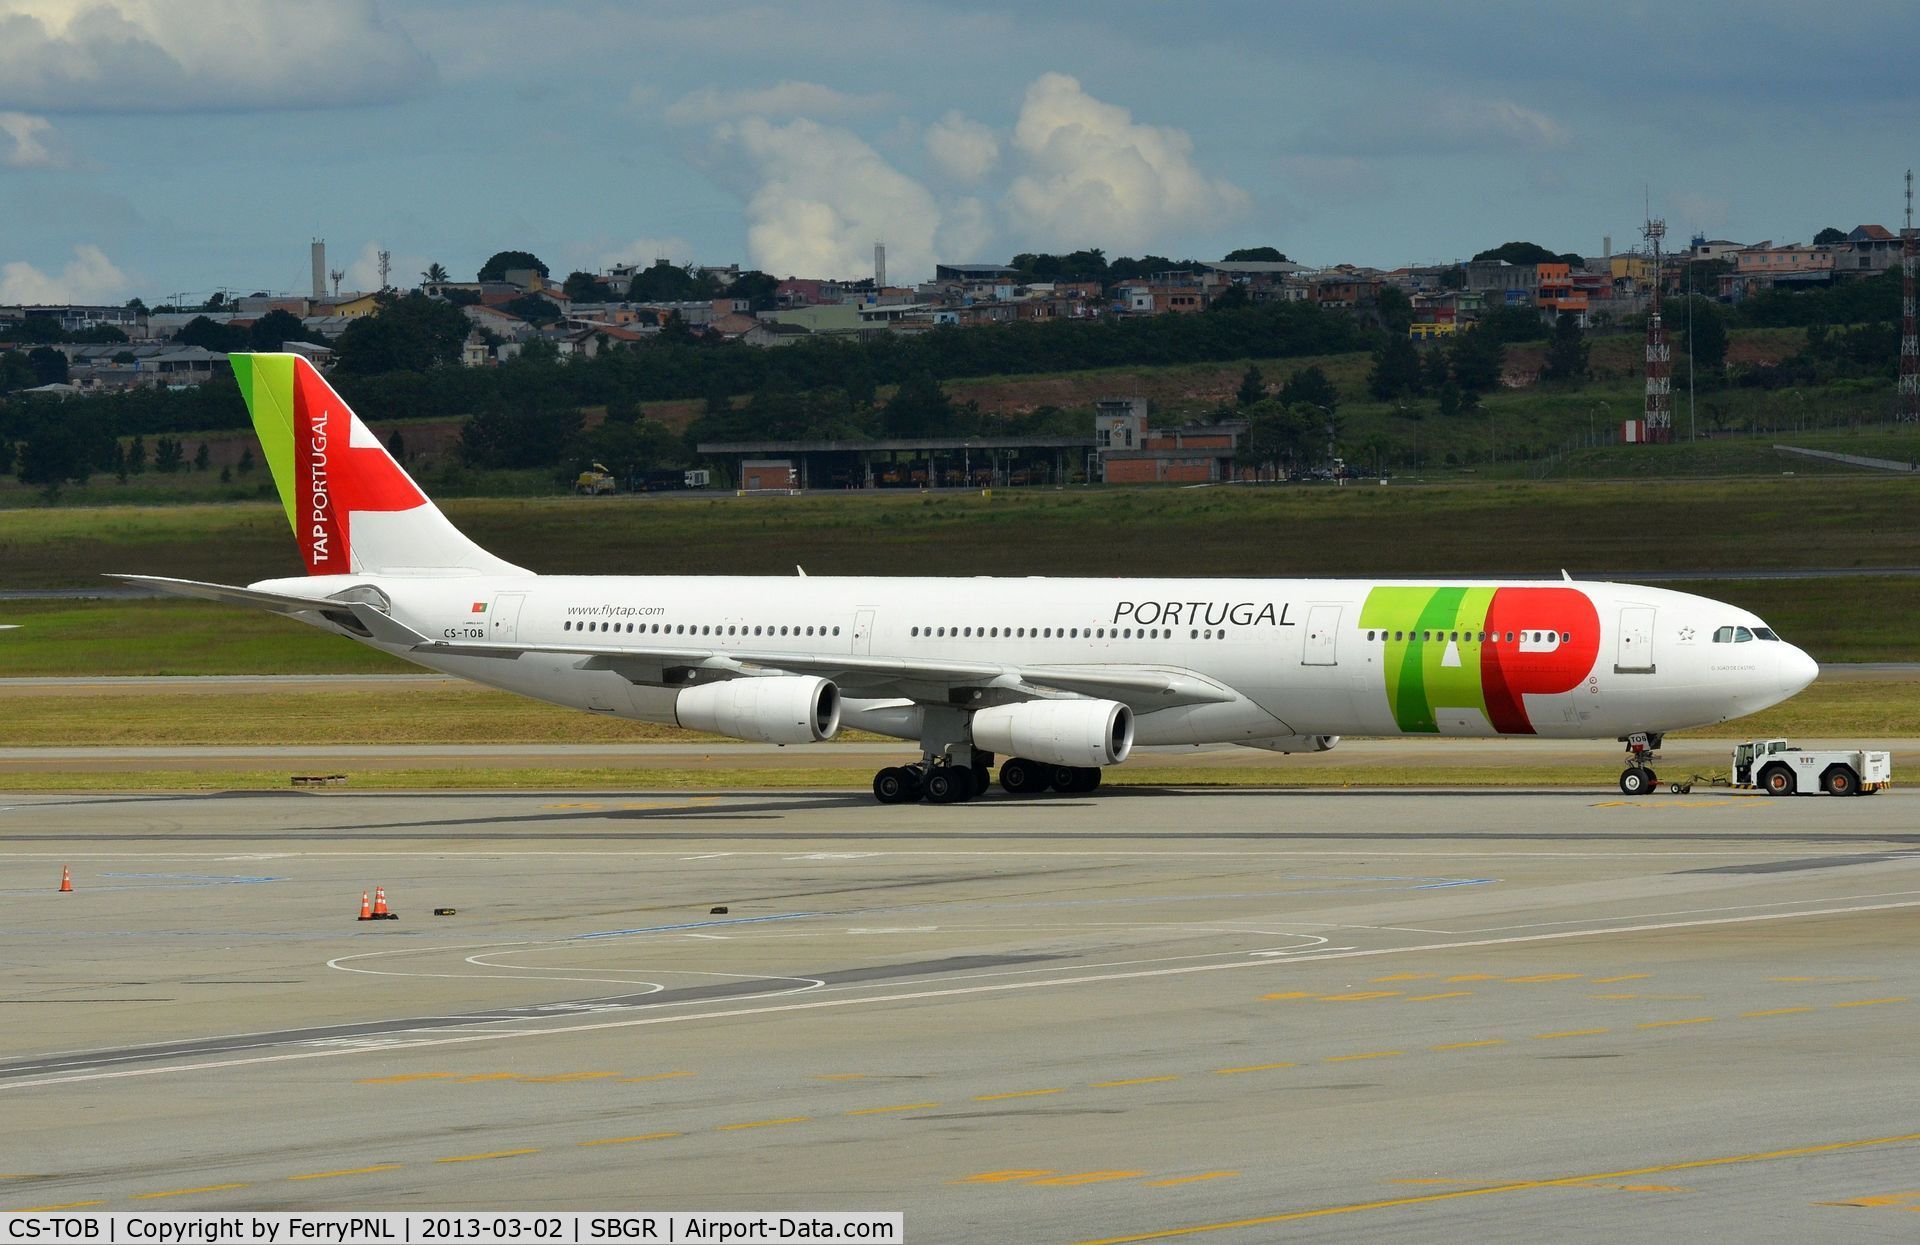 CS-TOB, 1994 Airbus A340-312 C/N 044, TAP A343 towed from stand to gate